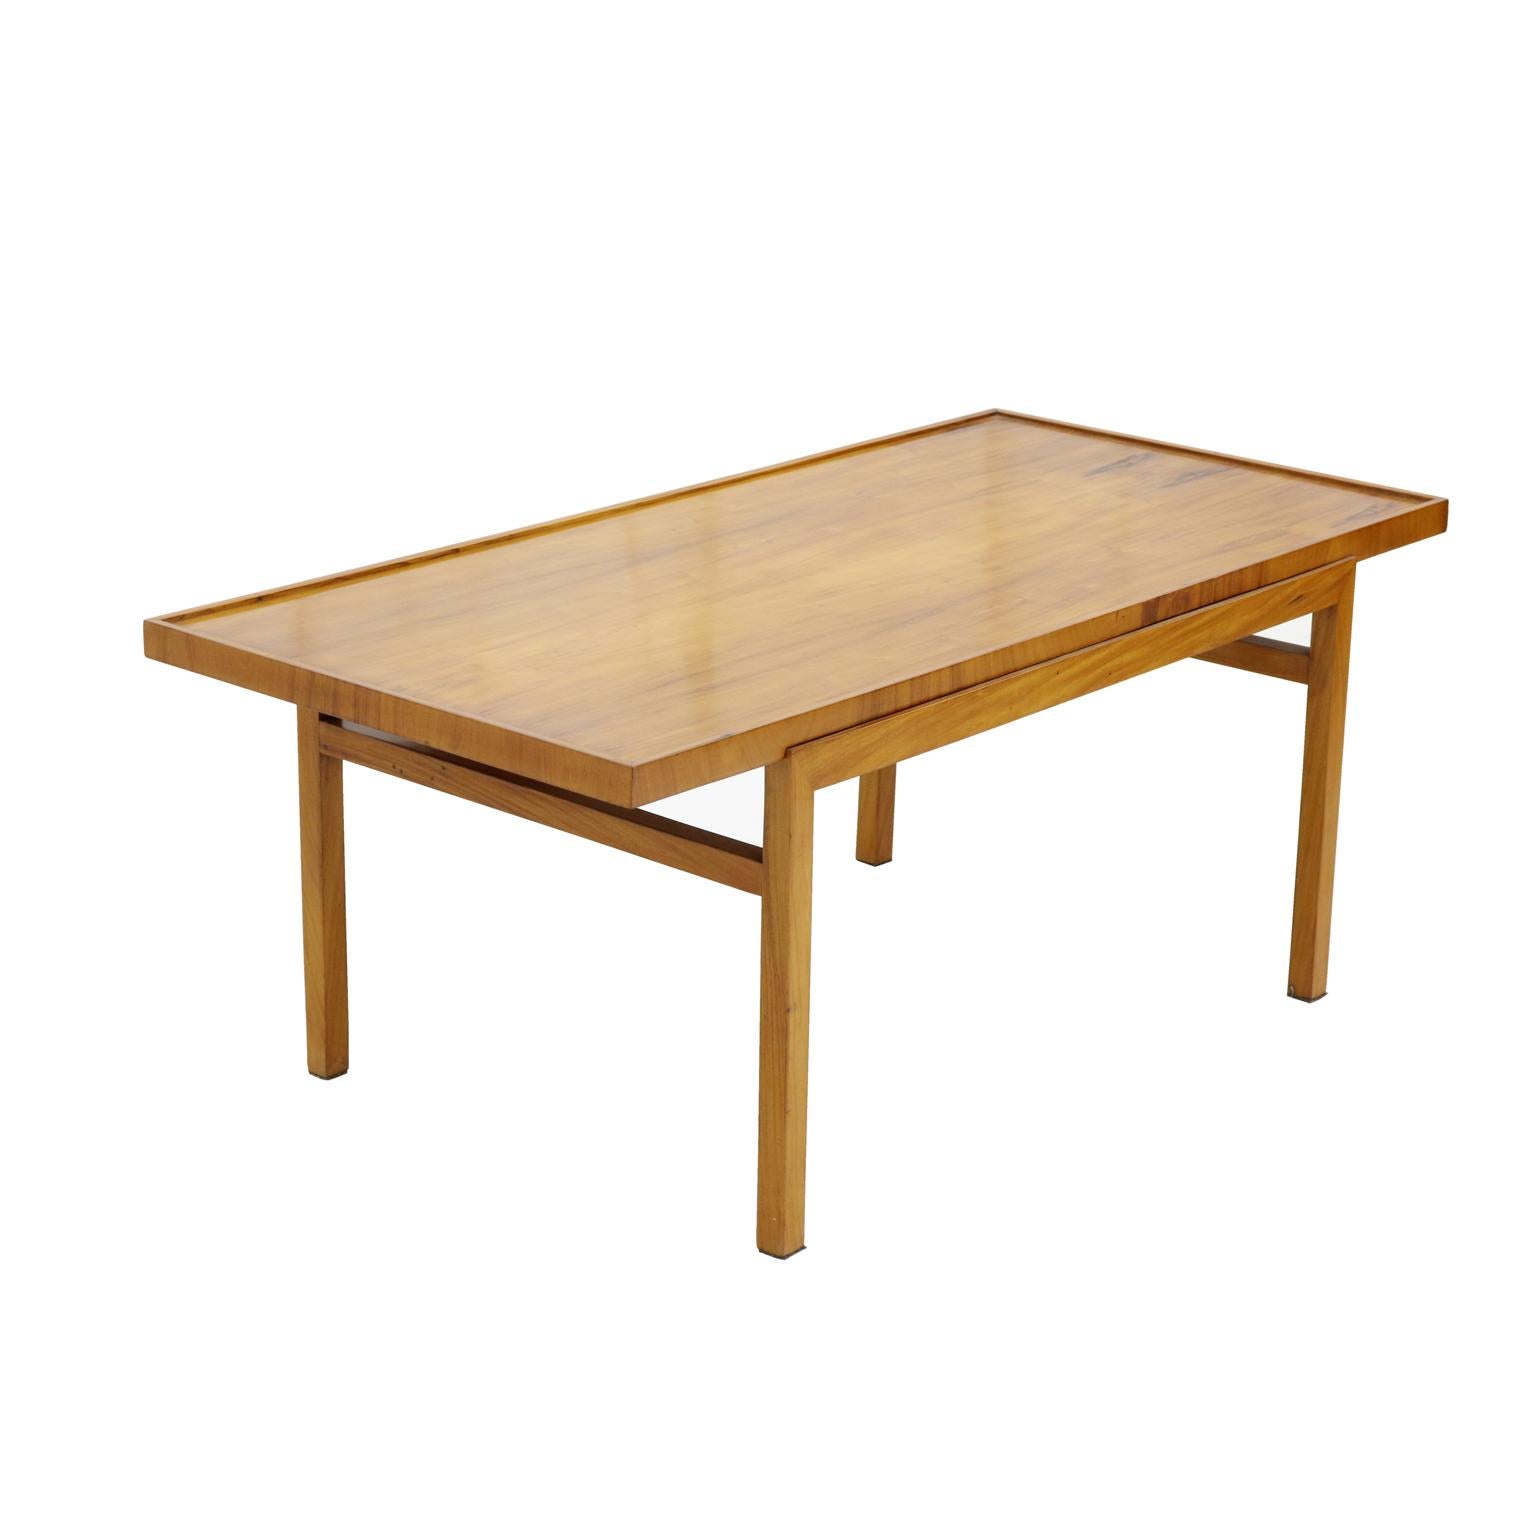 Brazilian midcentury coffee table in caviúna wood by Peter Kraft, 1950s.

Peter Kraft opened his own store in Sao Paulo in the 1950s. He designed clear shapes and usually worked with Caviuna wood with great attention to detail.